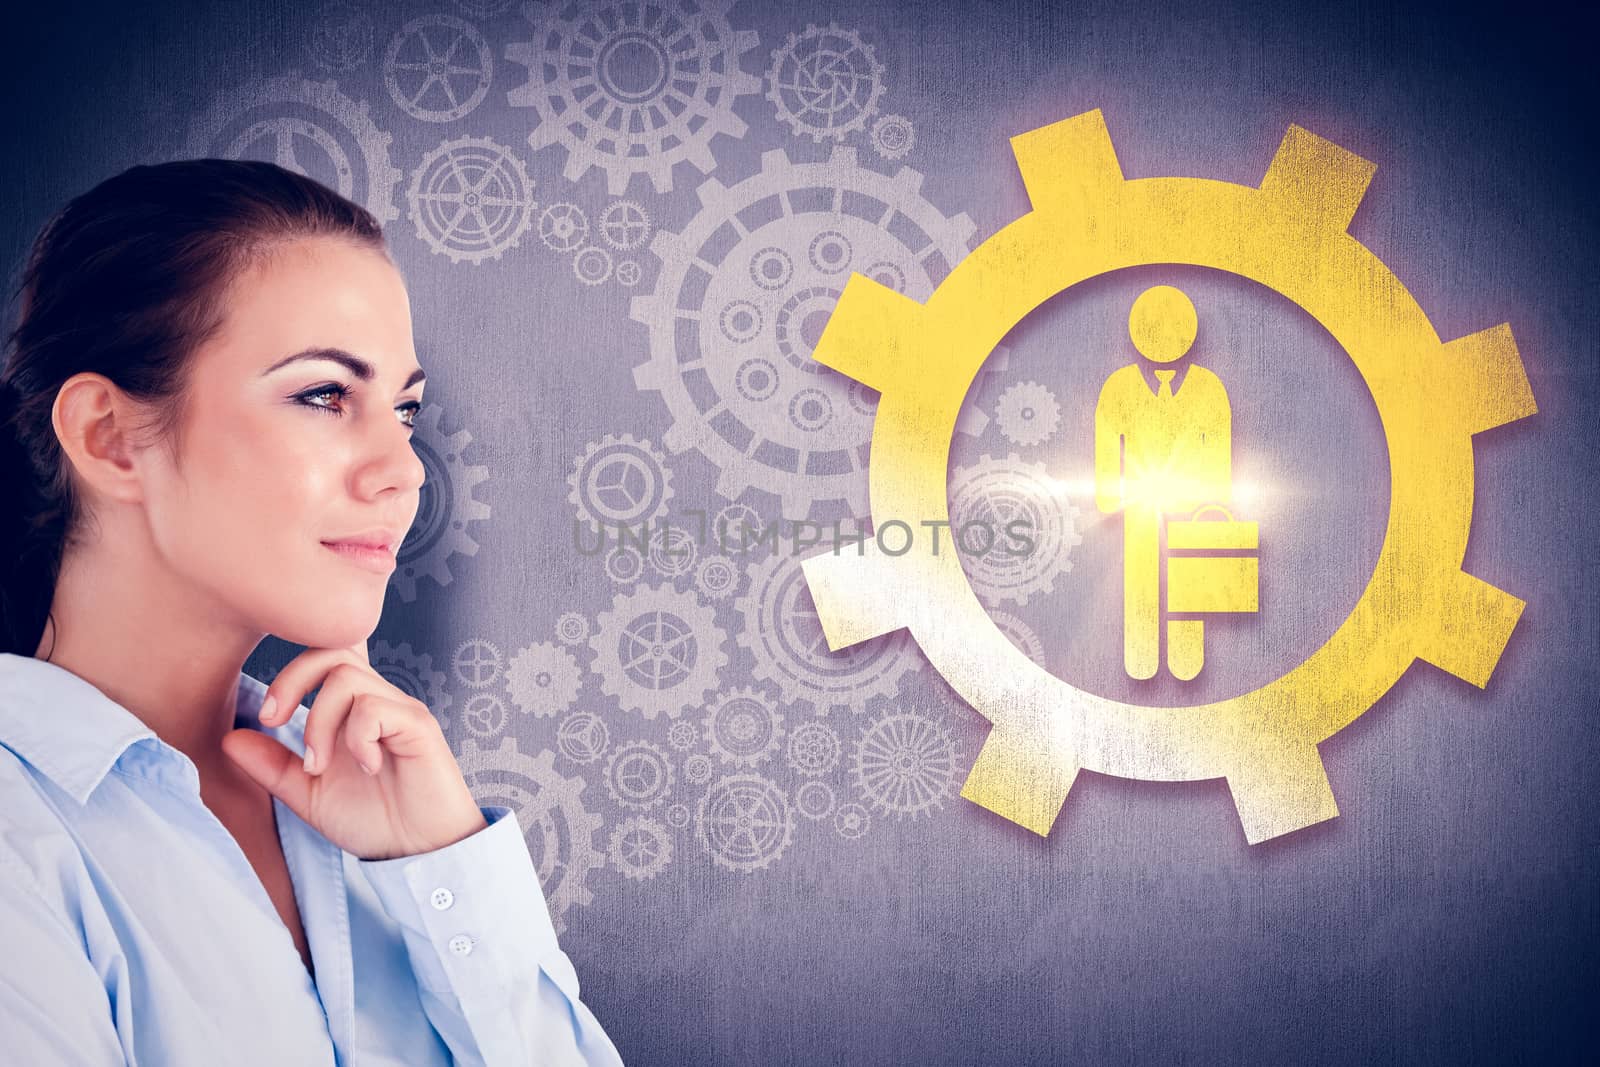 Composite image of side view of thinking businesswoman by Wavebreakmedia